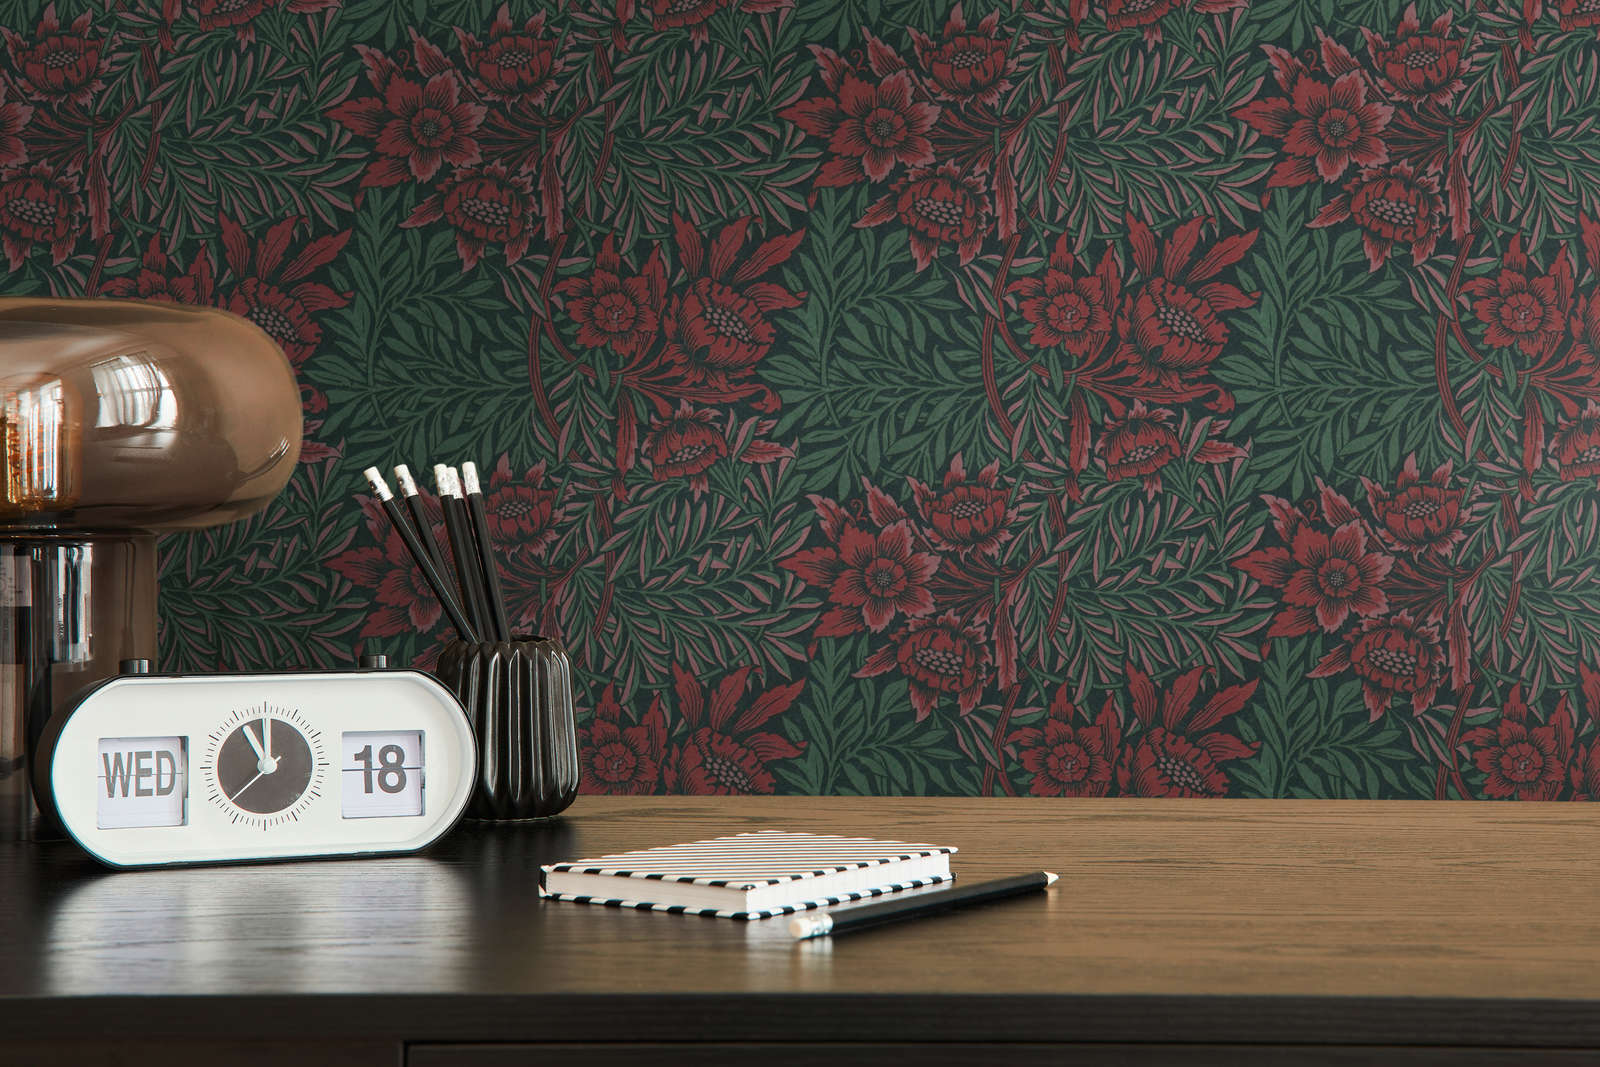             Non-woven wallpaper with floral pattern large flower and tendrils - green, red, black
        